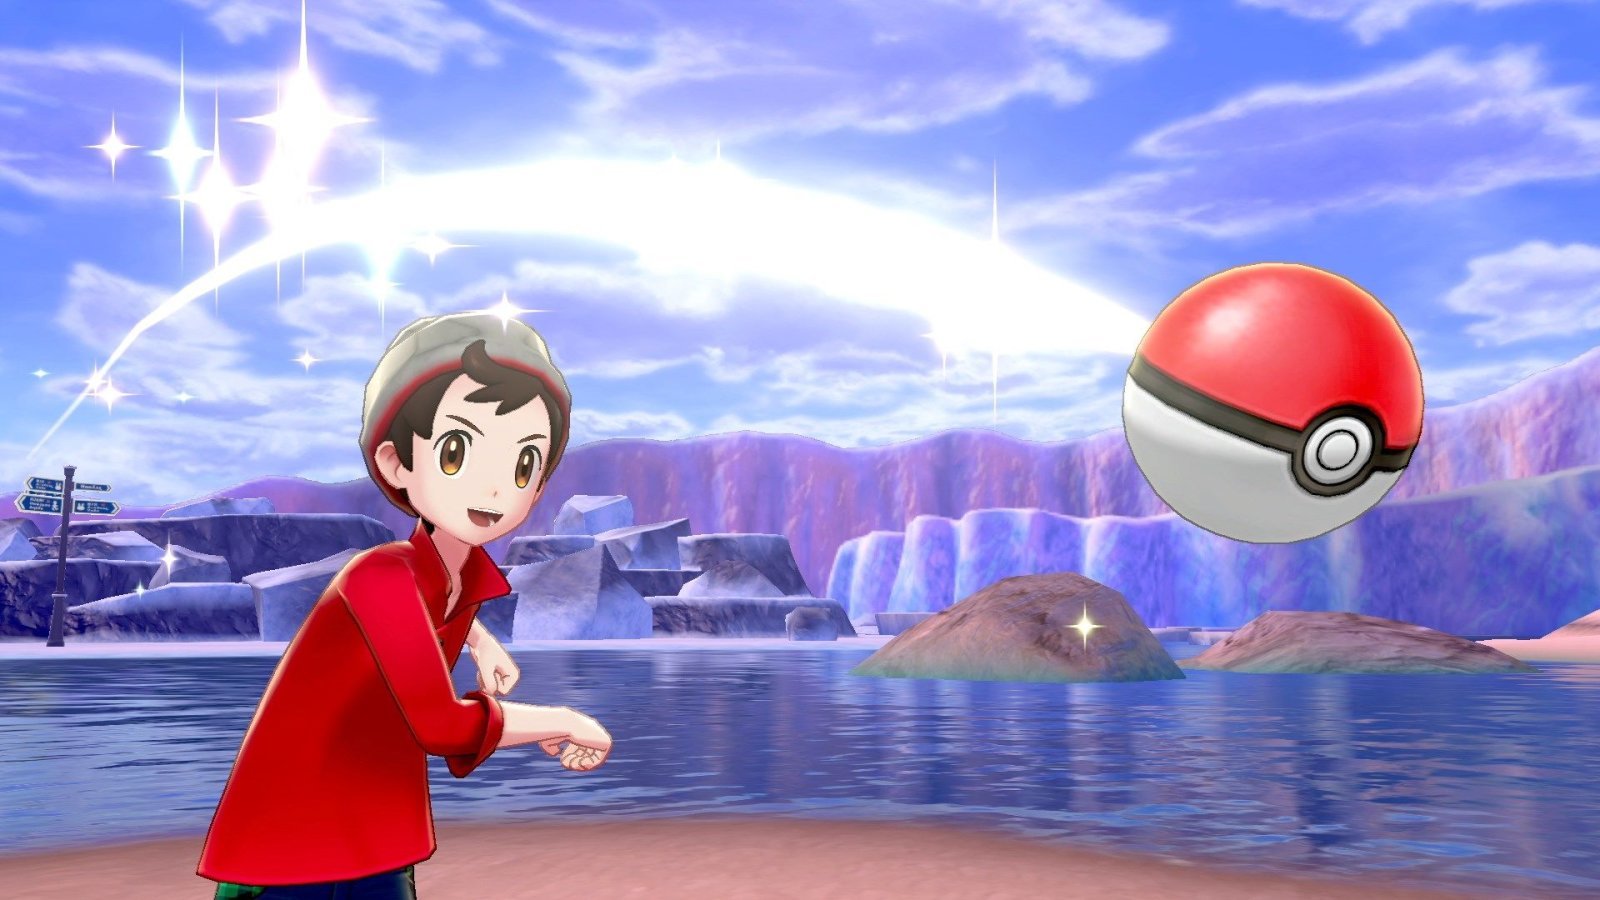 Pokémon Sword and Shield starters are getting Gigantamax forms - Polygon